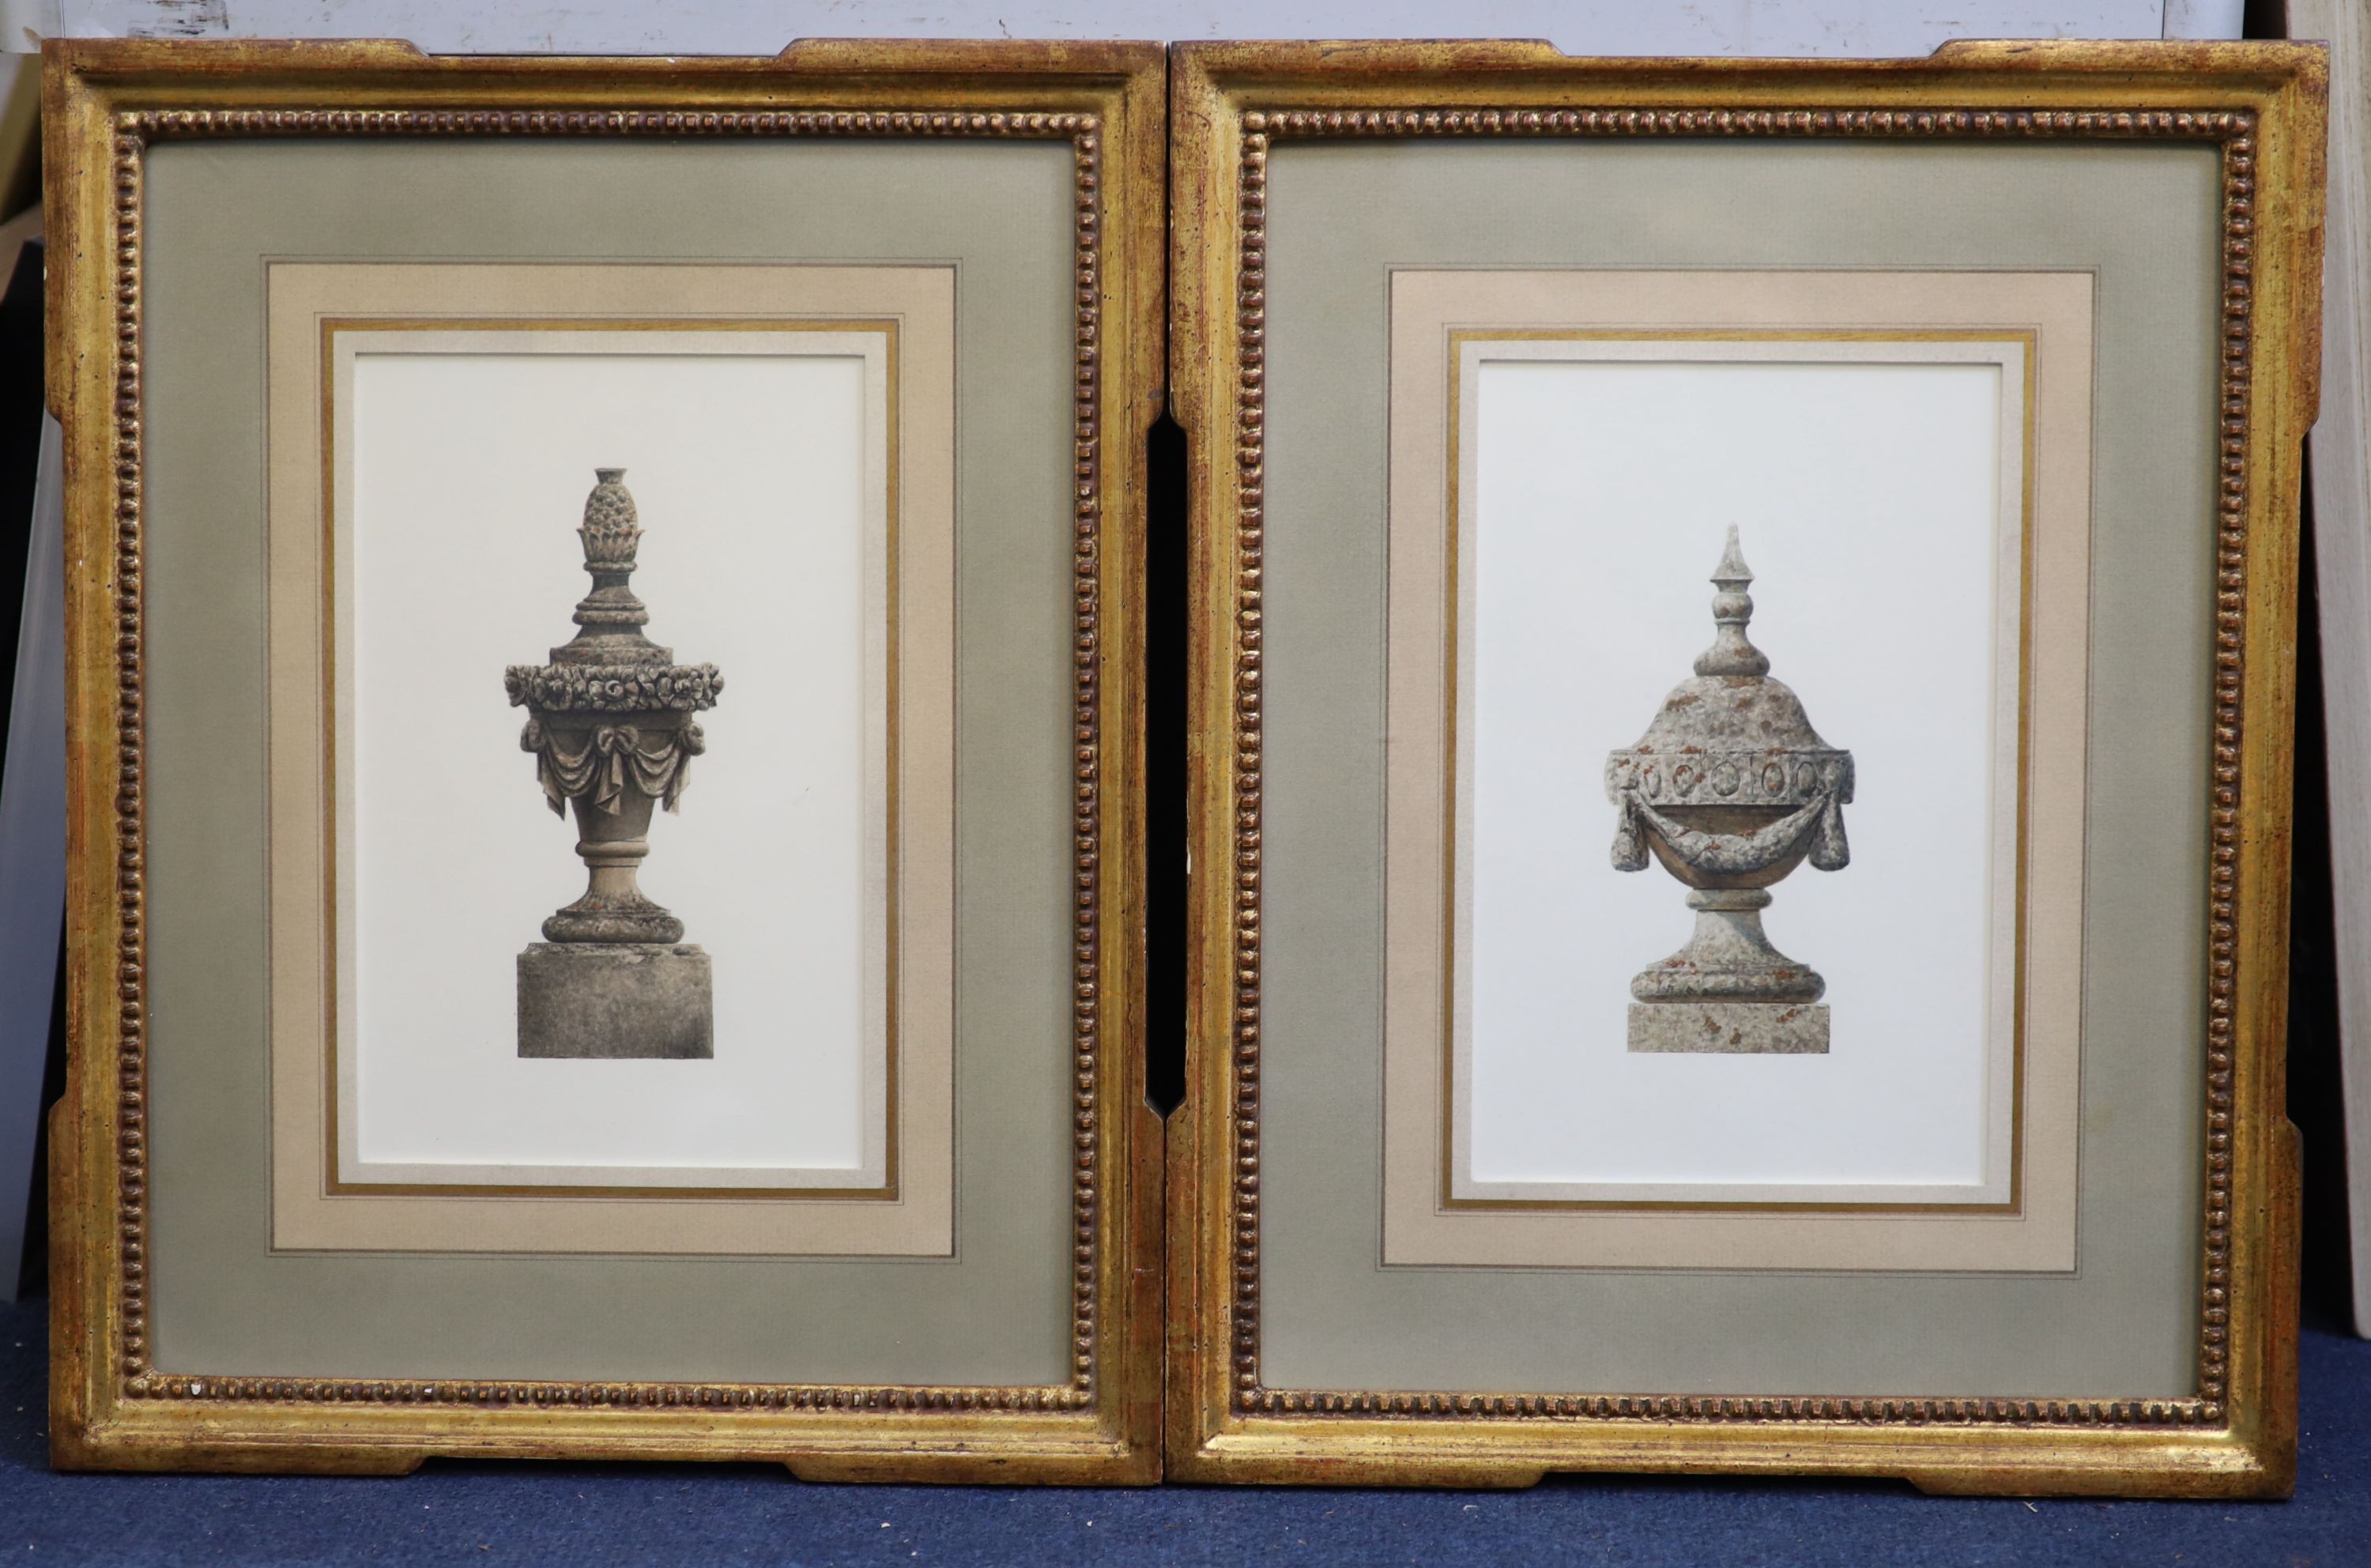 19th century English School, Studies of stone garden urns from Ven House, Somerset and Bow Wood, pair of watercolours, 21.5 x 13.5cm